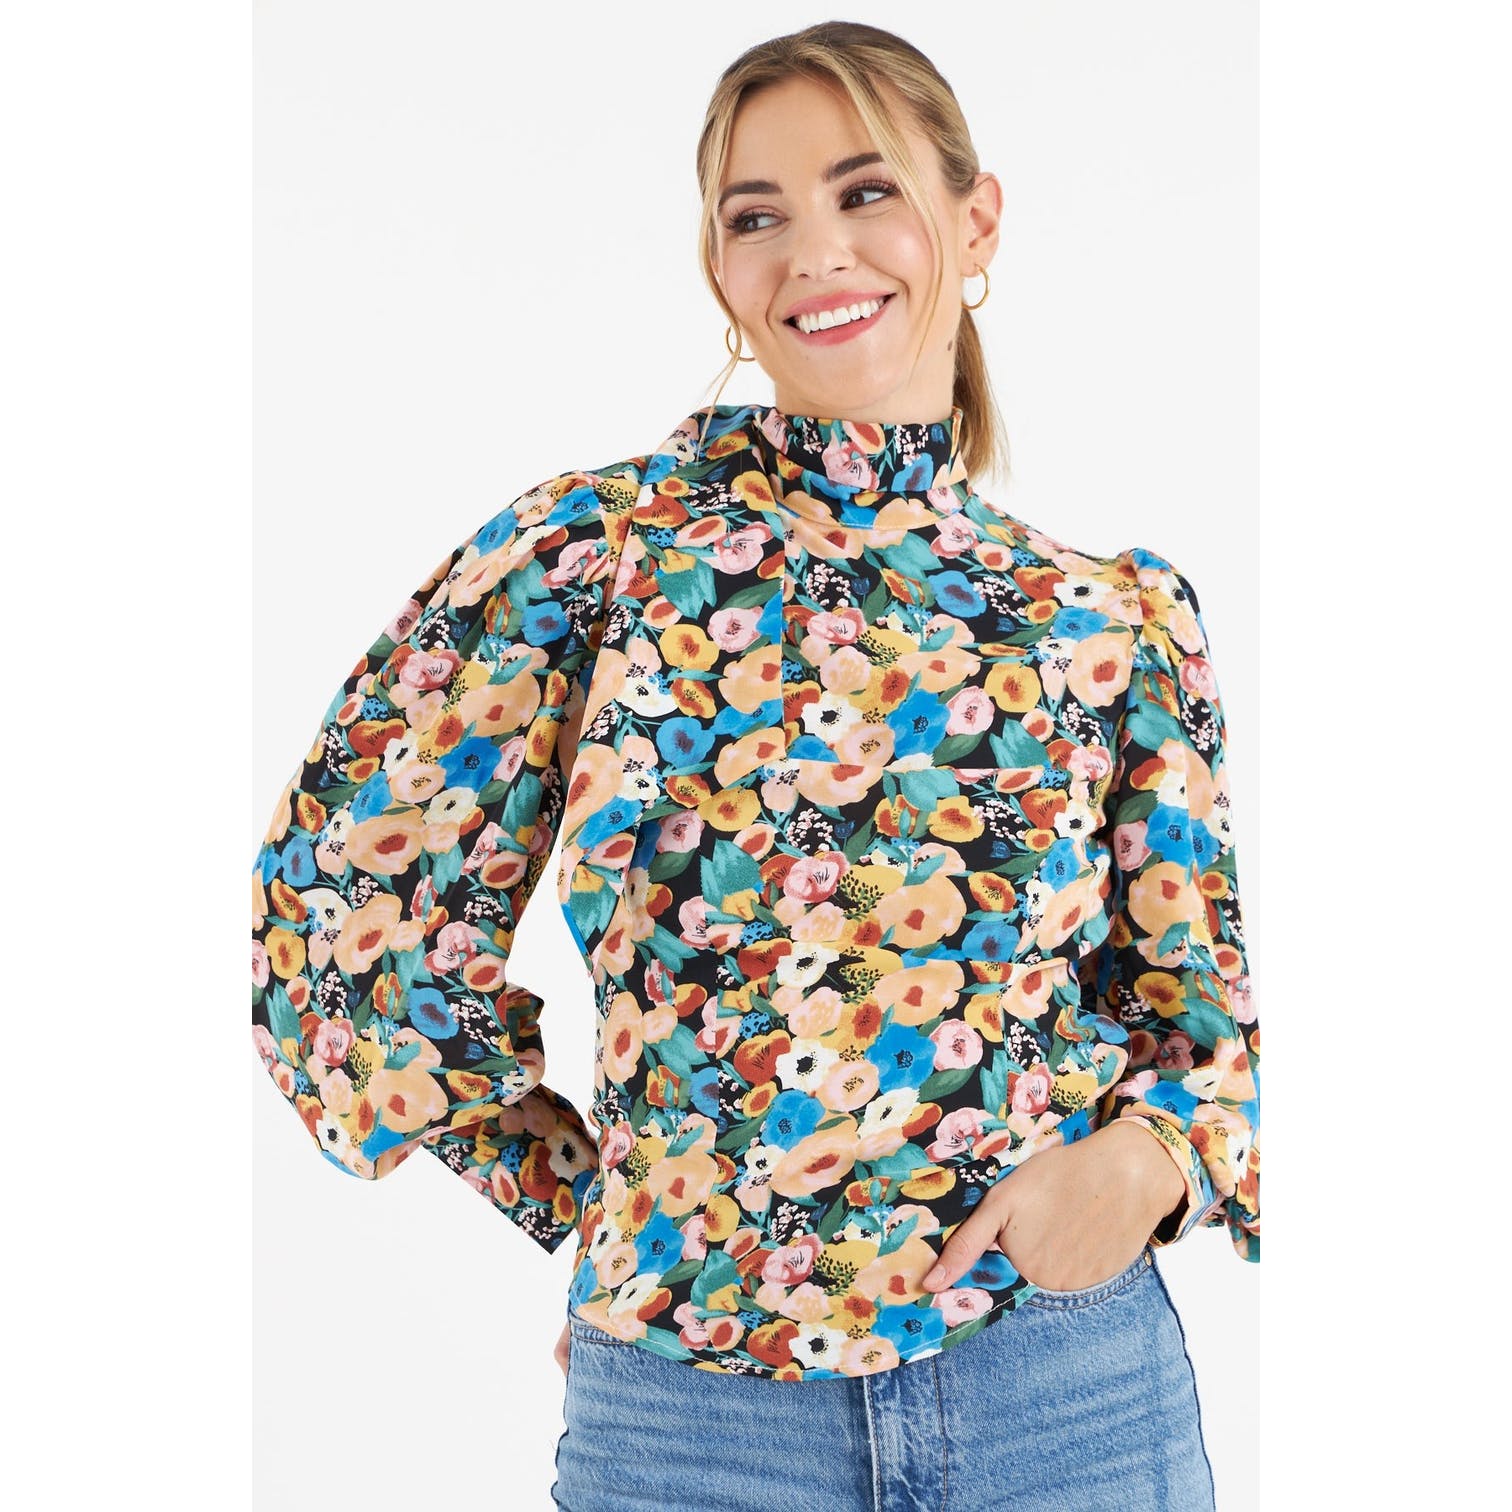 Moscow Floral Blouse (Black)